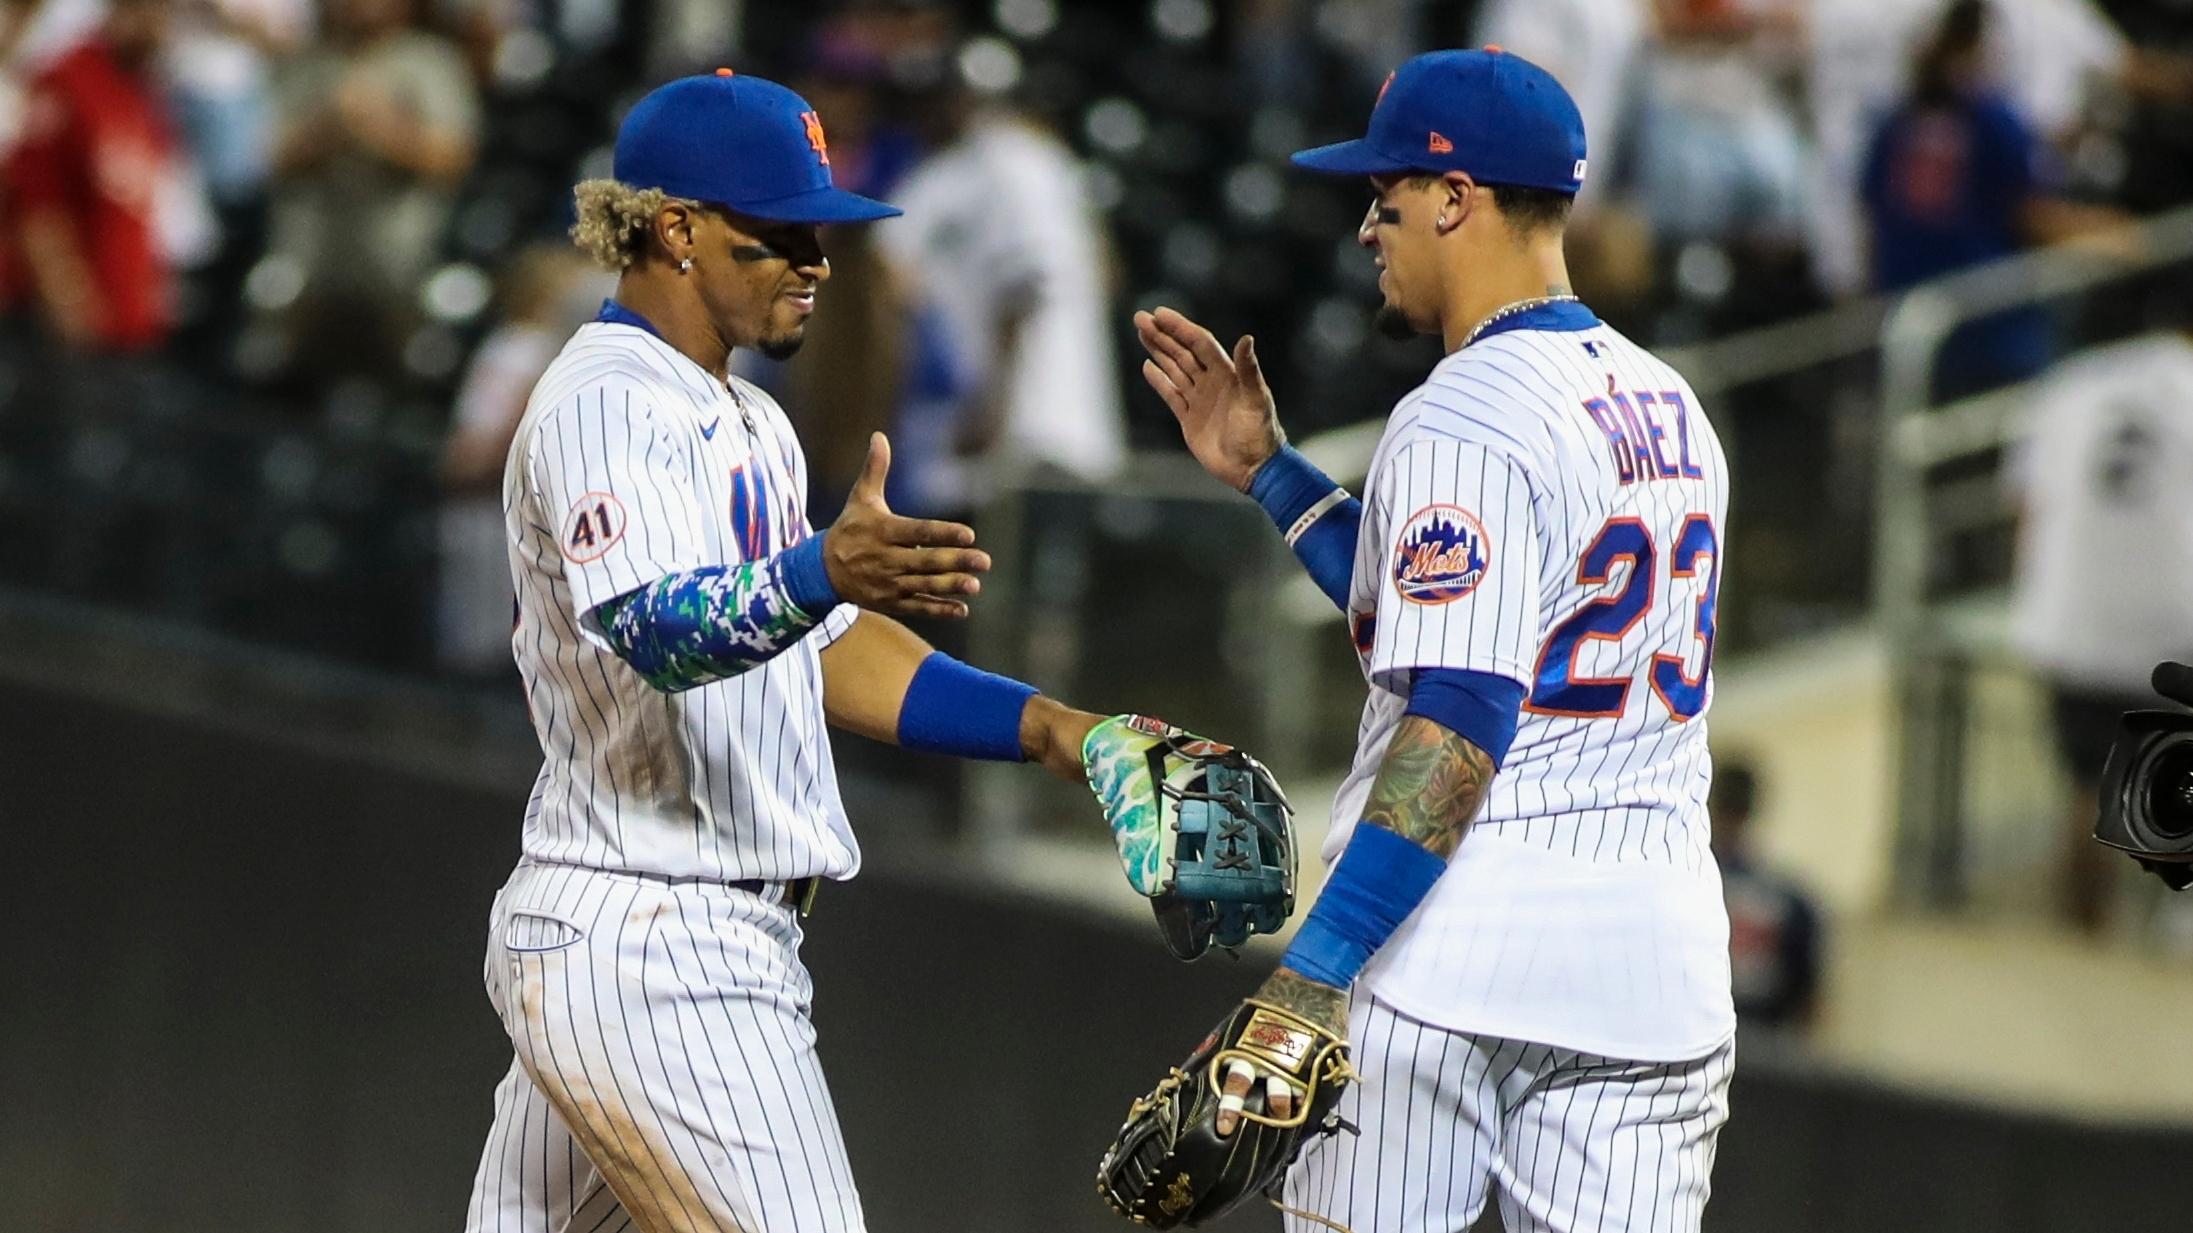 Sep 12, 2021; New York City, New York, USA; New York Mets shortstop Francisco Lindor(12) and second baseman Javier Baez (23) celebrate after defeating the New York Yankees 7-6 at Citi Field. / Wendell Cruz-USA TODAY Sports